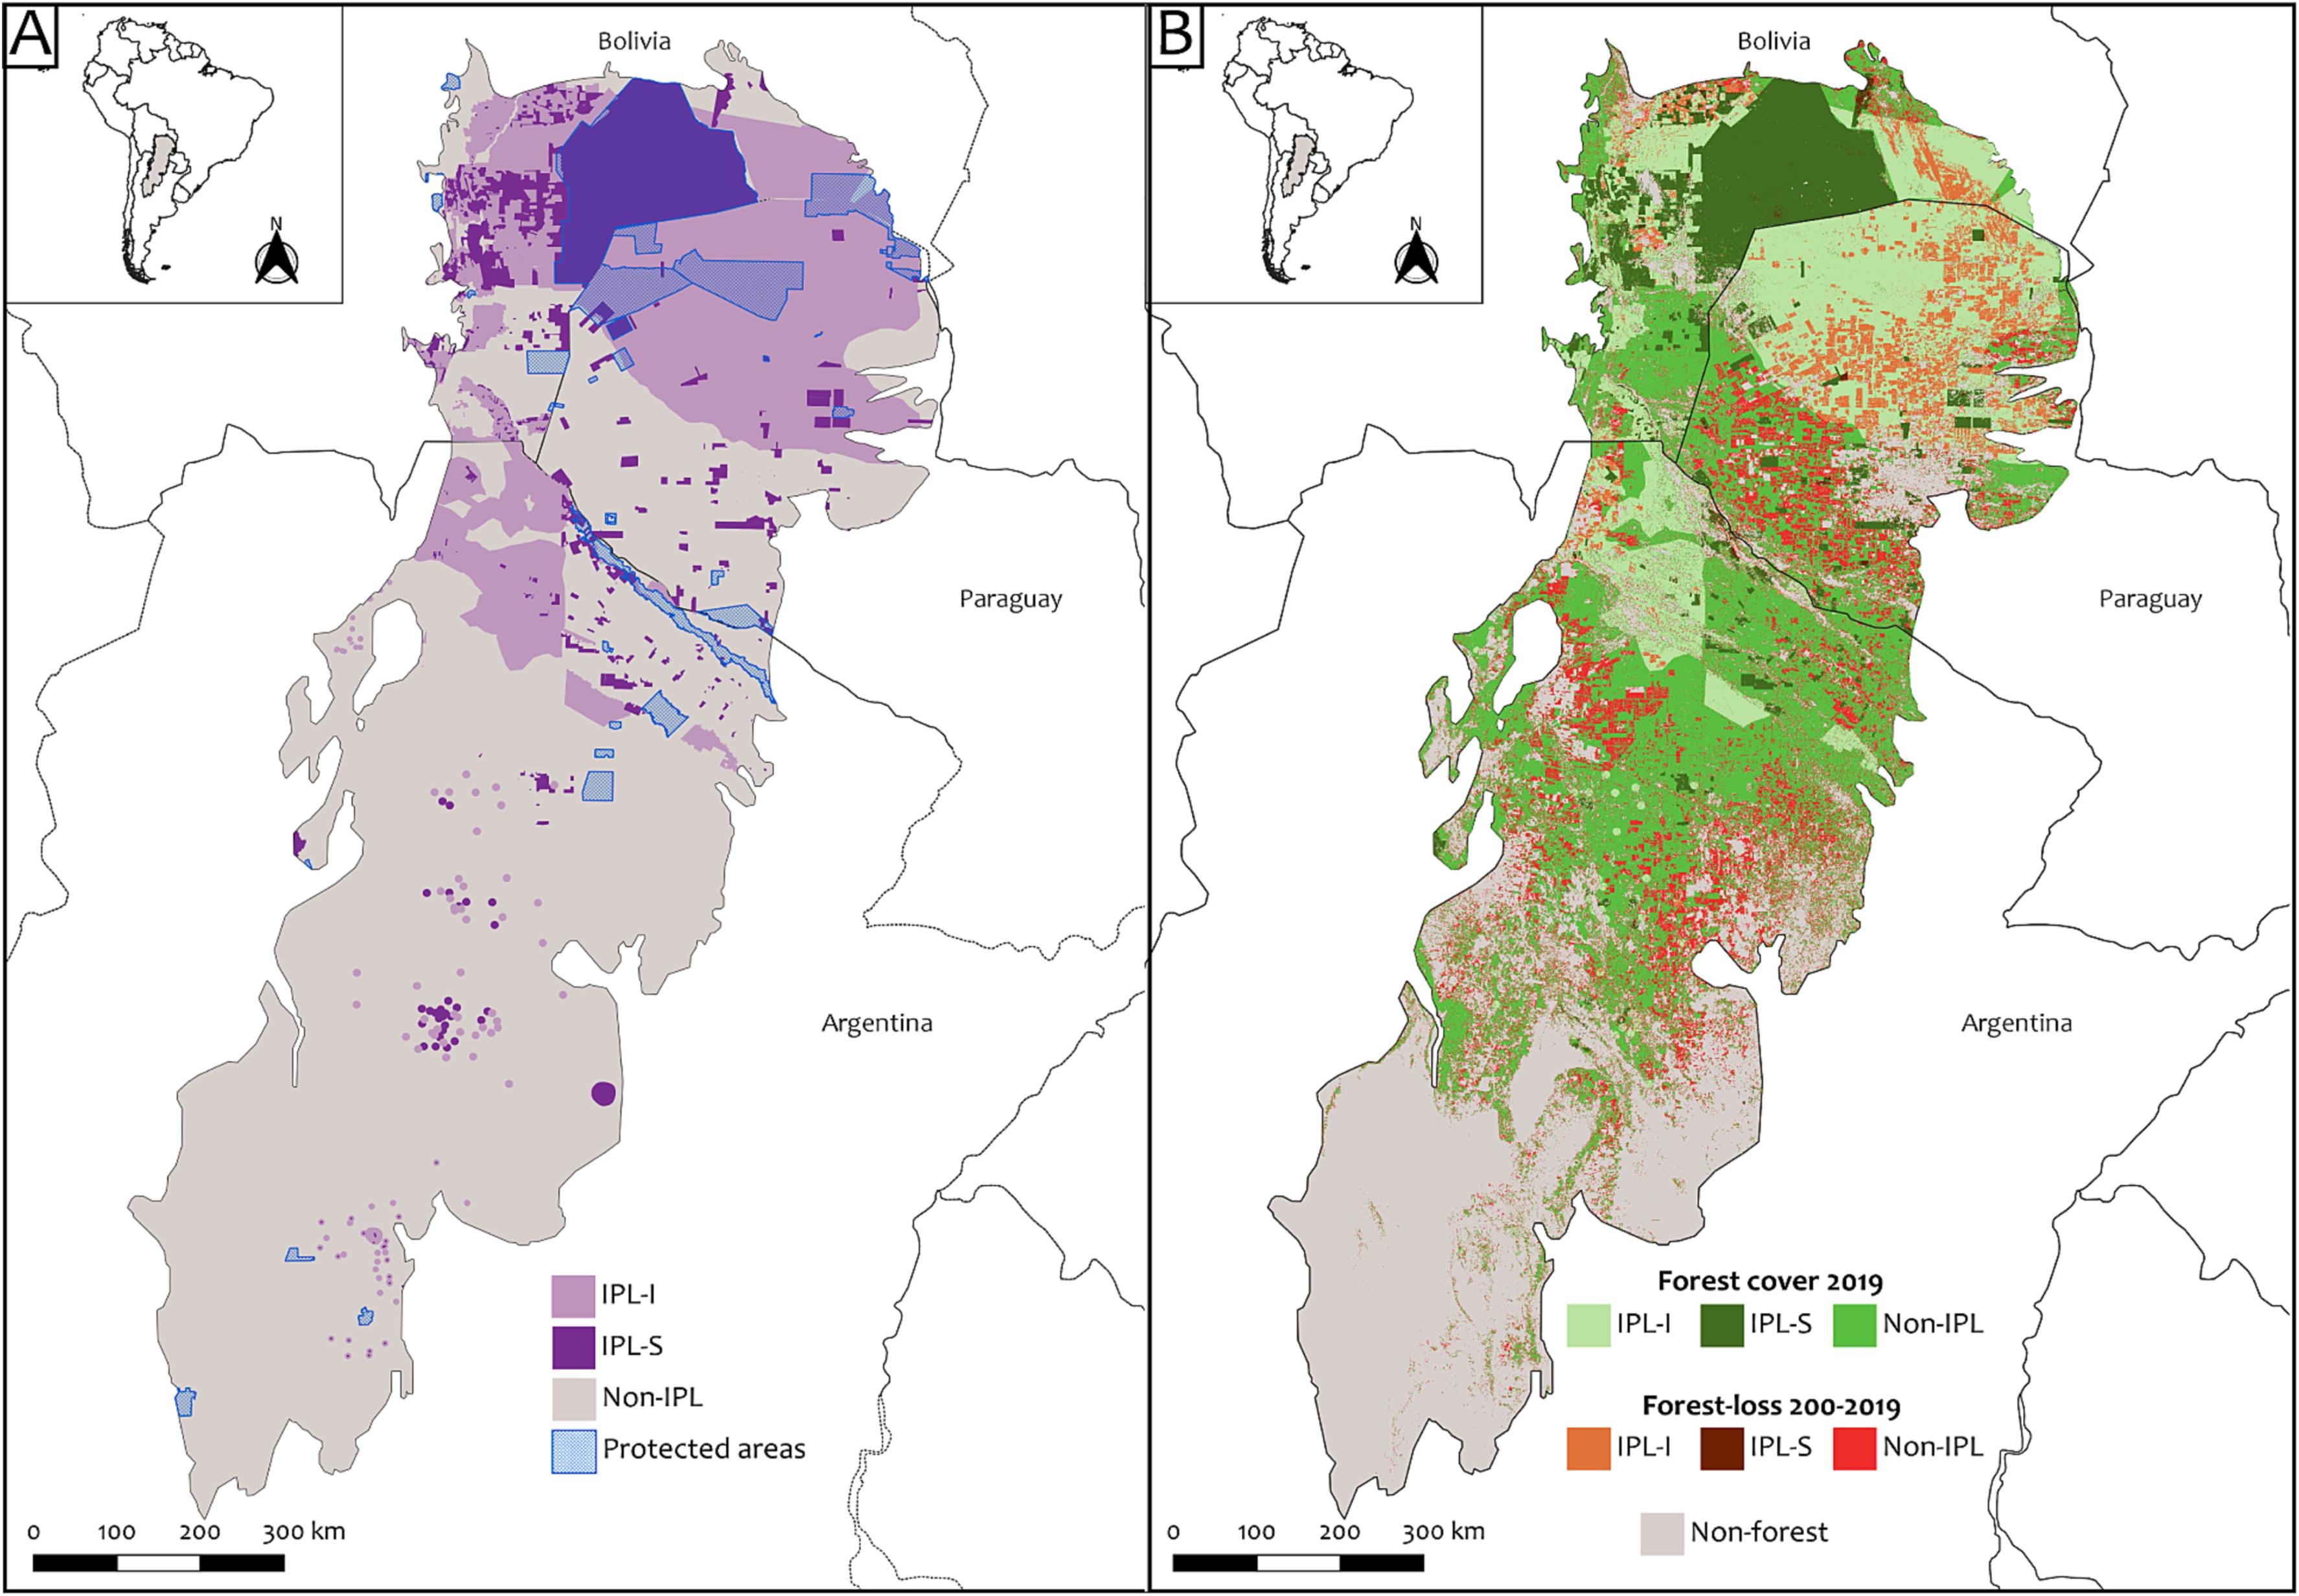 Image: Figure 1, Camino et al., 2023. A: Indigenous Peoples’ Lands with land tenure insecurity (IPL-I) and with land tenure security (IPL-S), land that are not Indigenous (Non-IPL), and Protected Areas in the Dry Chaco region. B: Forest cover in 2019 and forest lost between the years 2000 and 2019 in Indigenous Peoples’ Lands with land tenure insecurity (IPL-I), Indigenous Peoples’ Lands with land tenure security (IPL-S), and in lands that are not Indigenous (Non-IPL), in the Dry Chaco region.